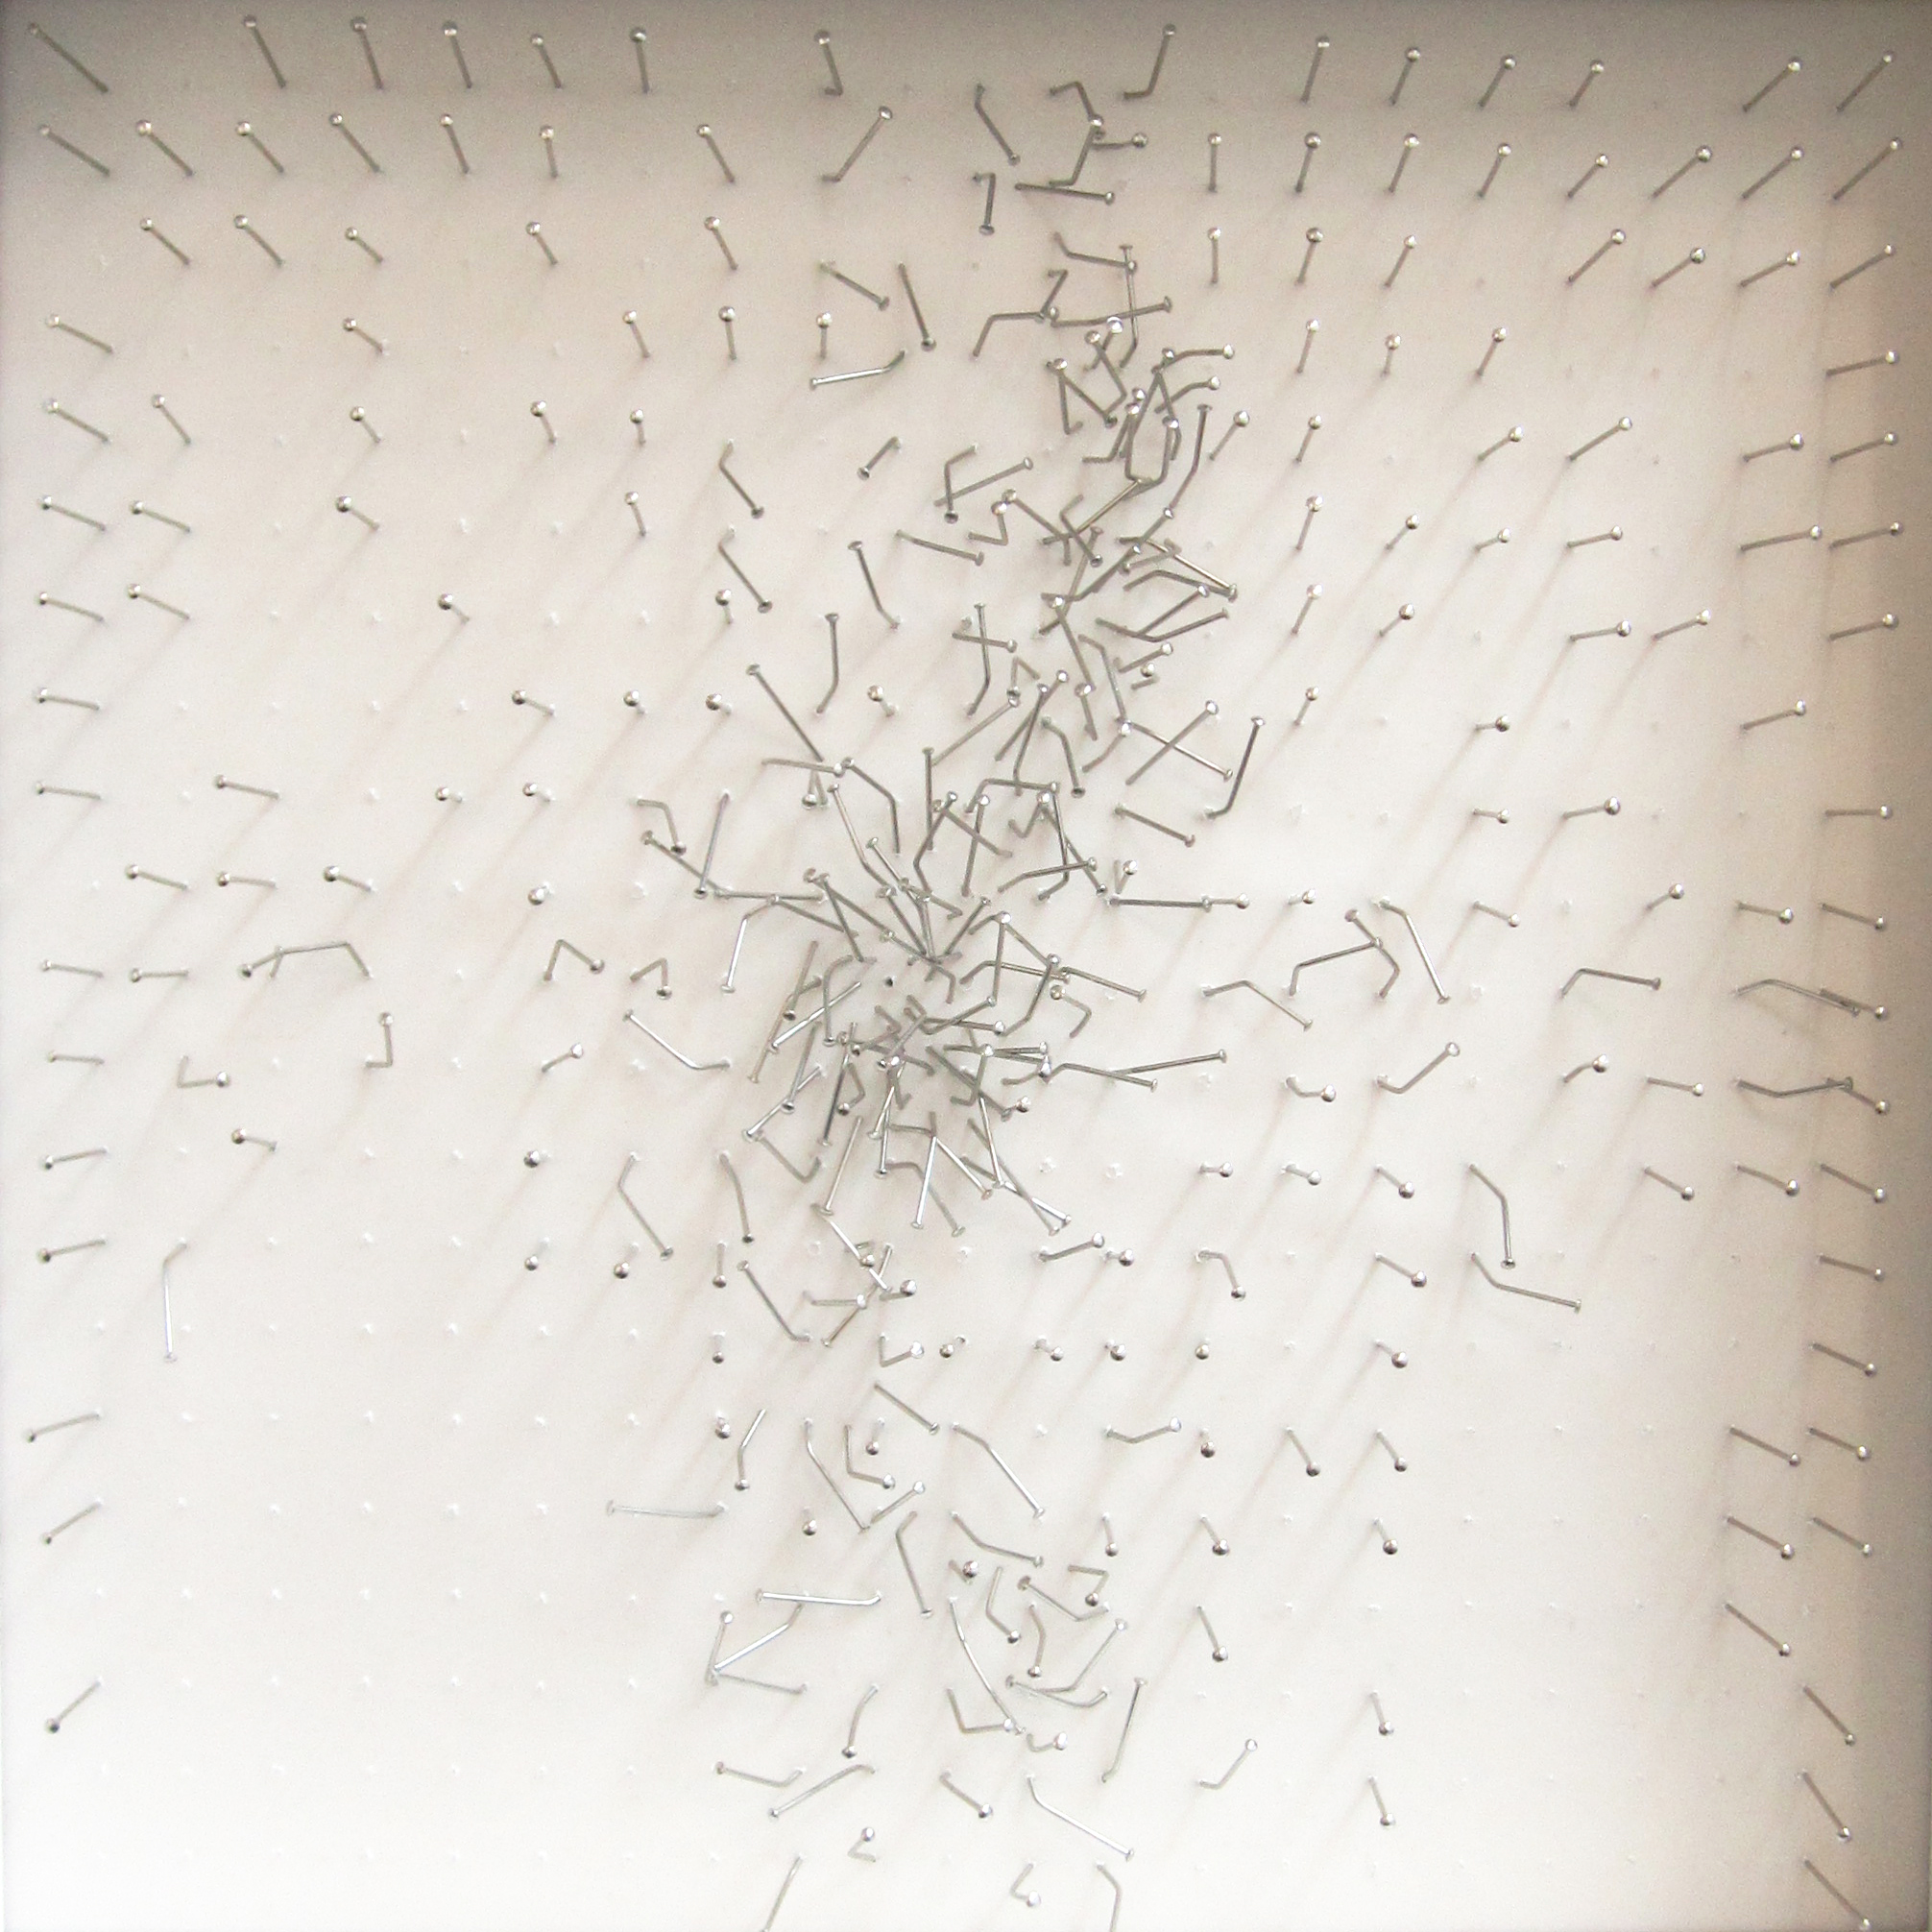 Untitled
2011
Nails and tracing paper
25cm x 25cm